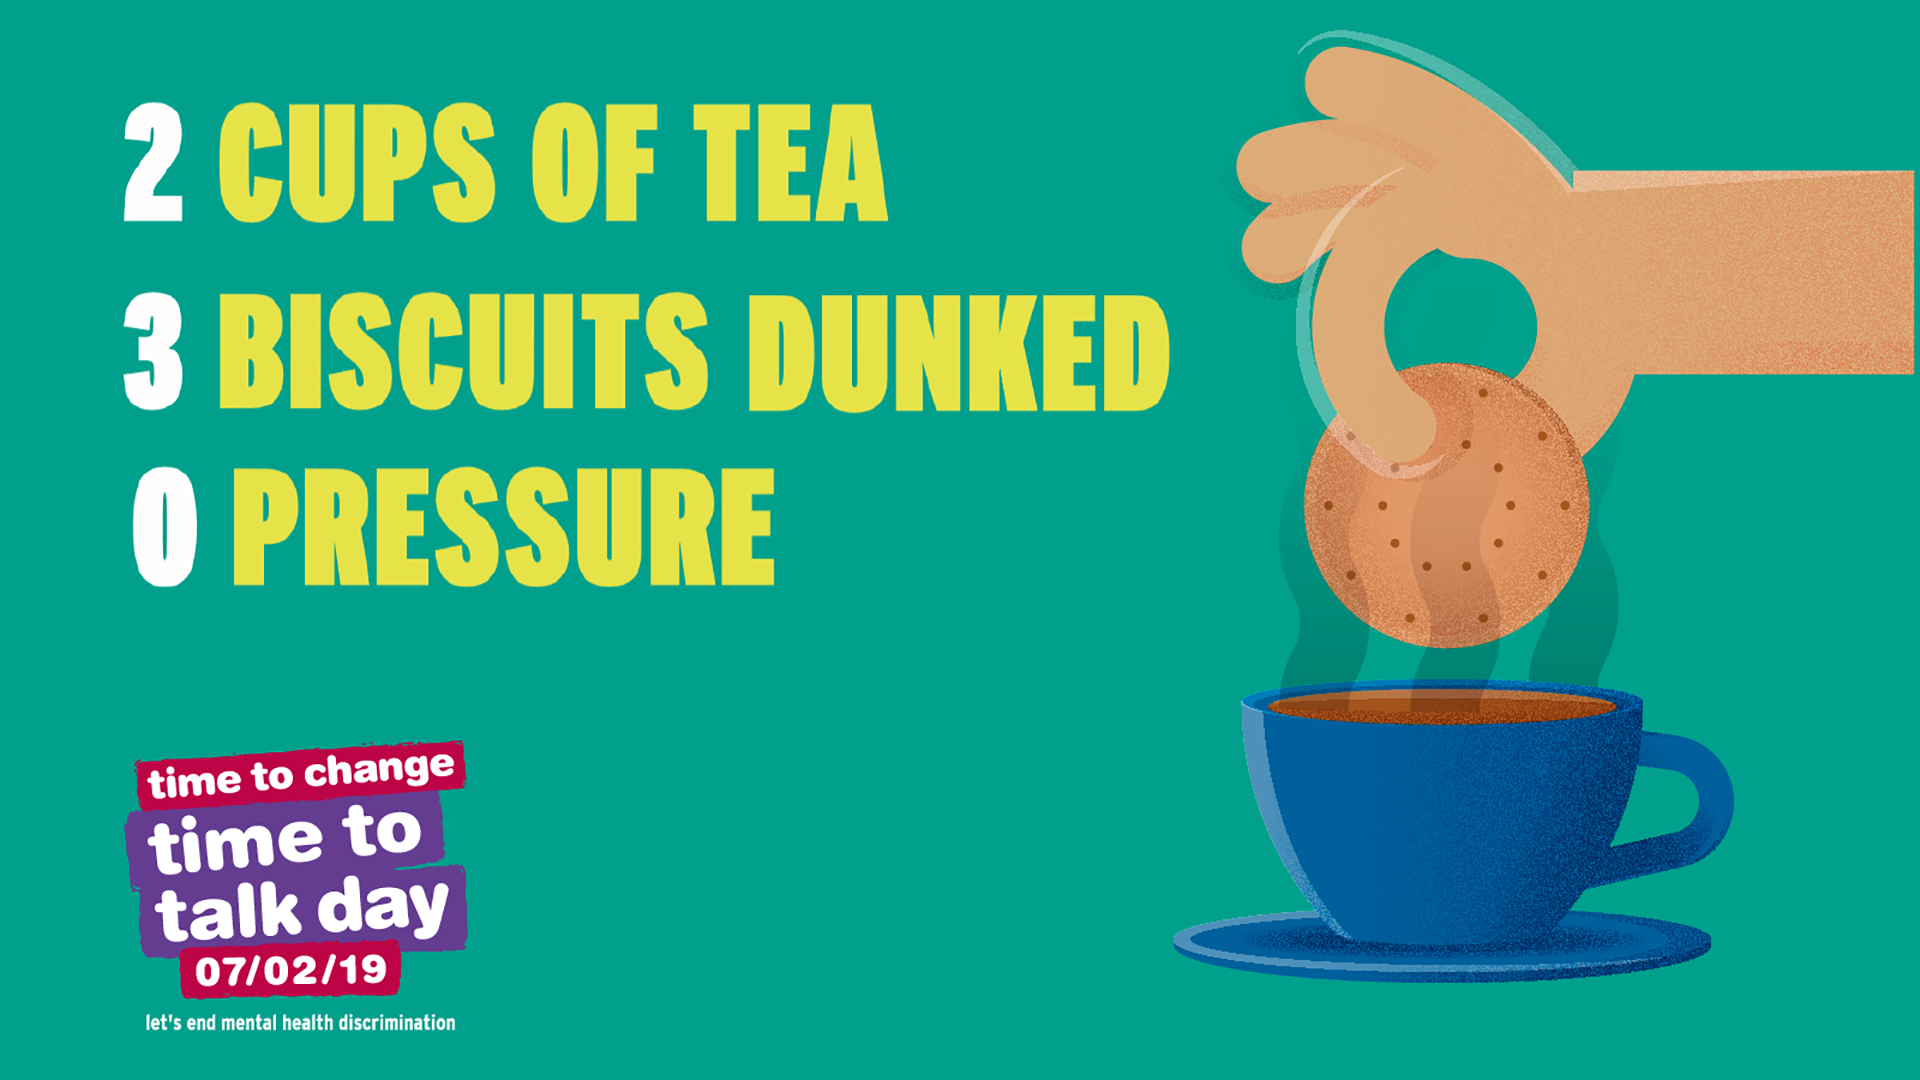 A Time to Talk poster that says '2 cups of tea, 3 biscuits dunked, 0 pressure'